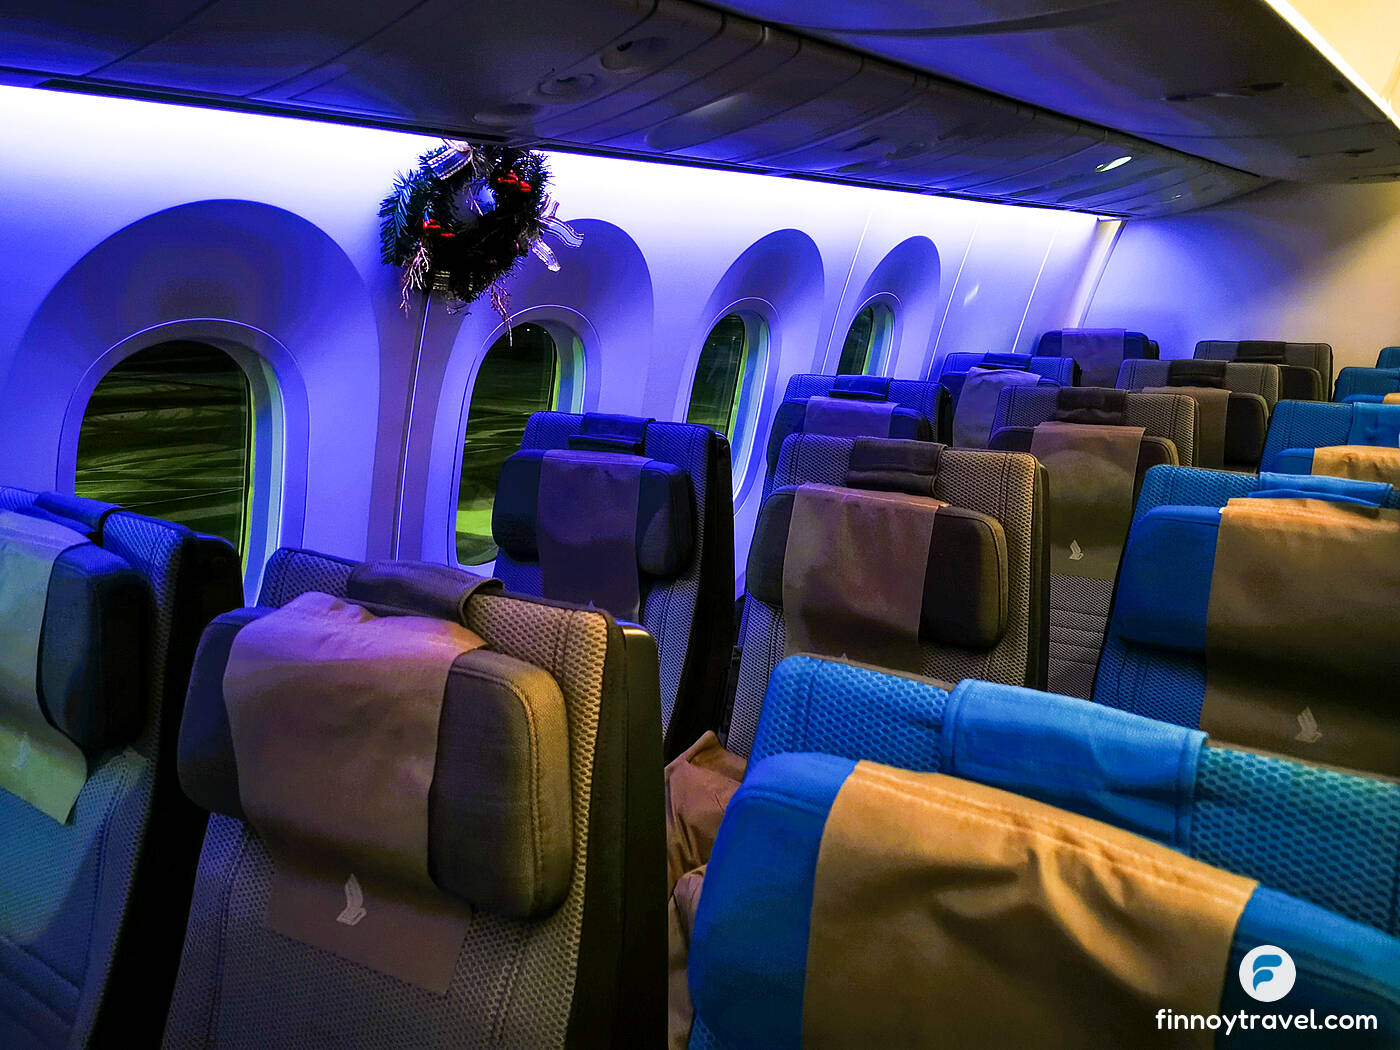 Airplane seats of Singapore Airlines with some Christmas decorations by the windows.